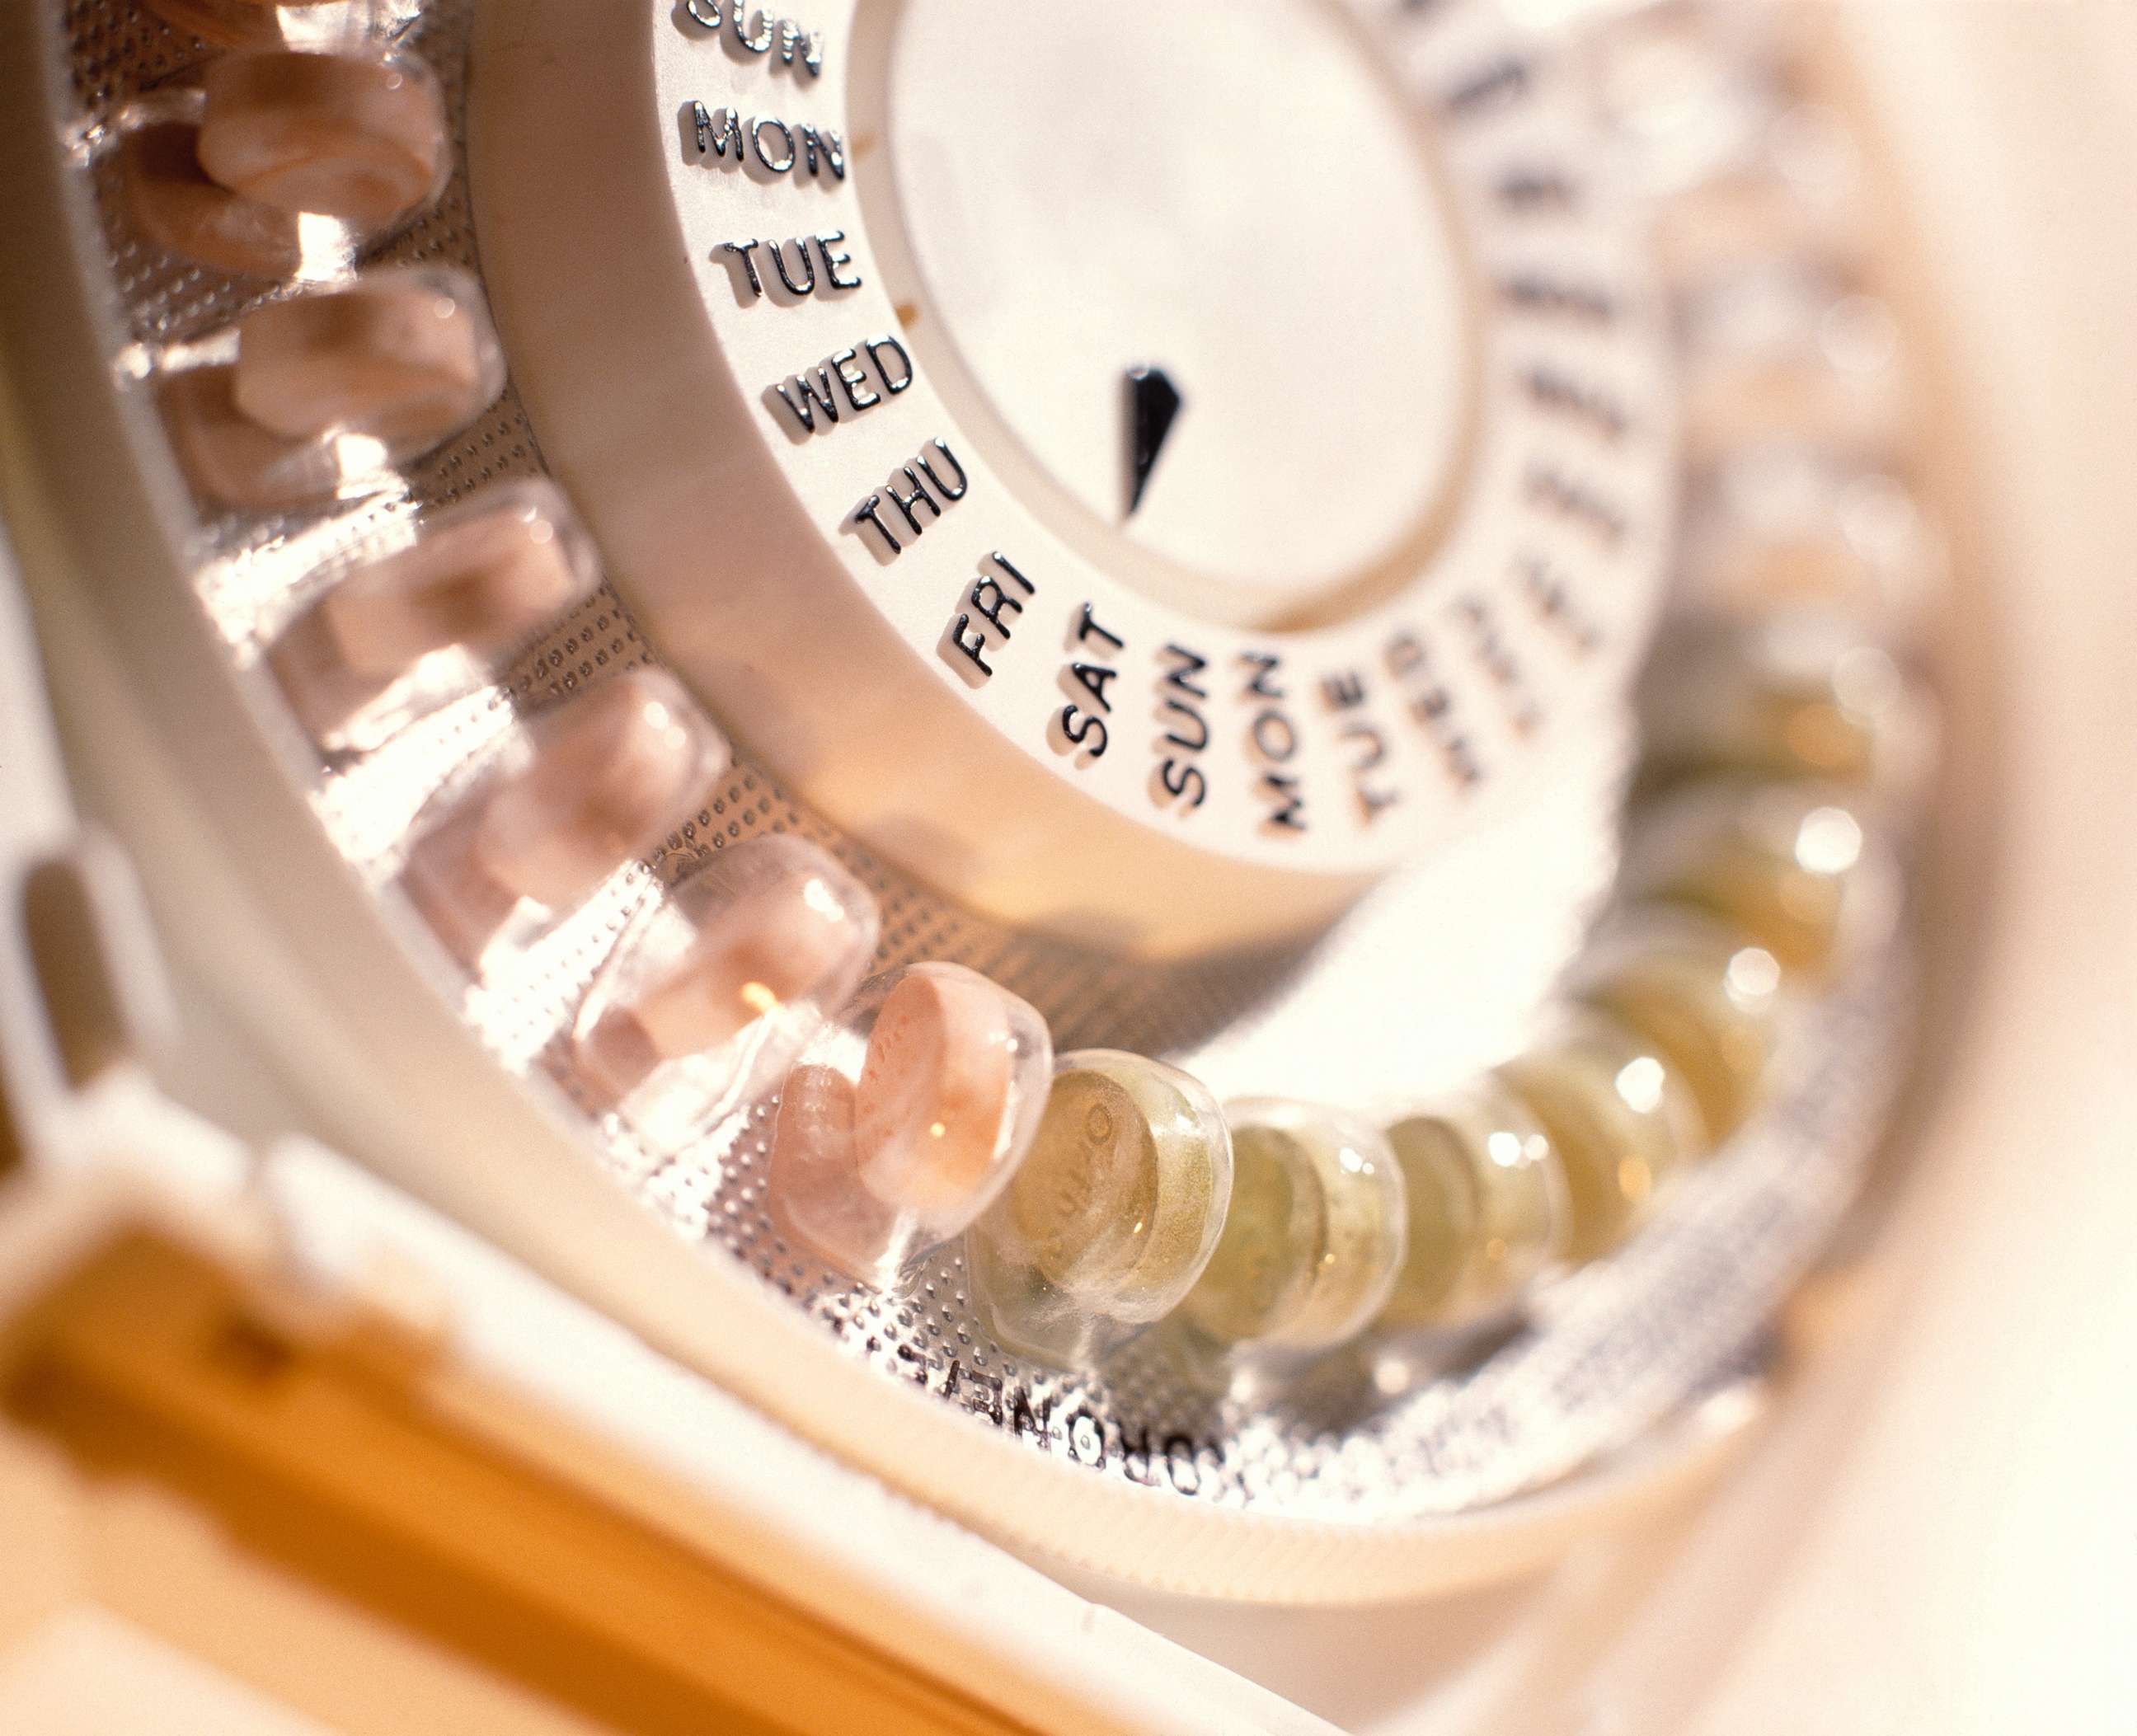 PHOTO: Birth control pills are pictured in this undated stock photo.